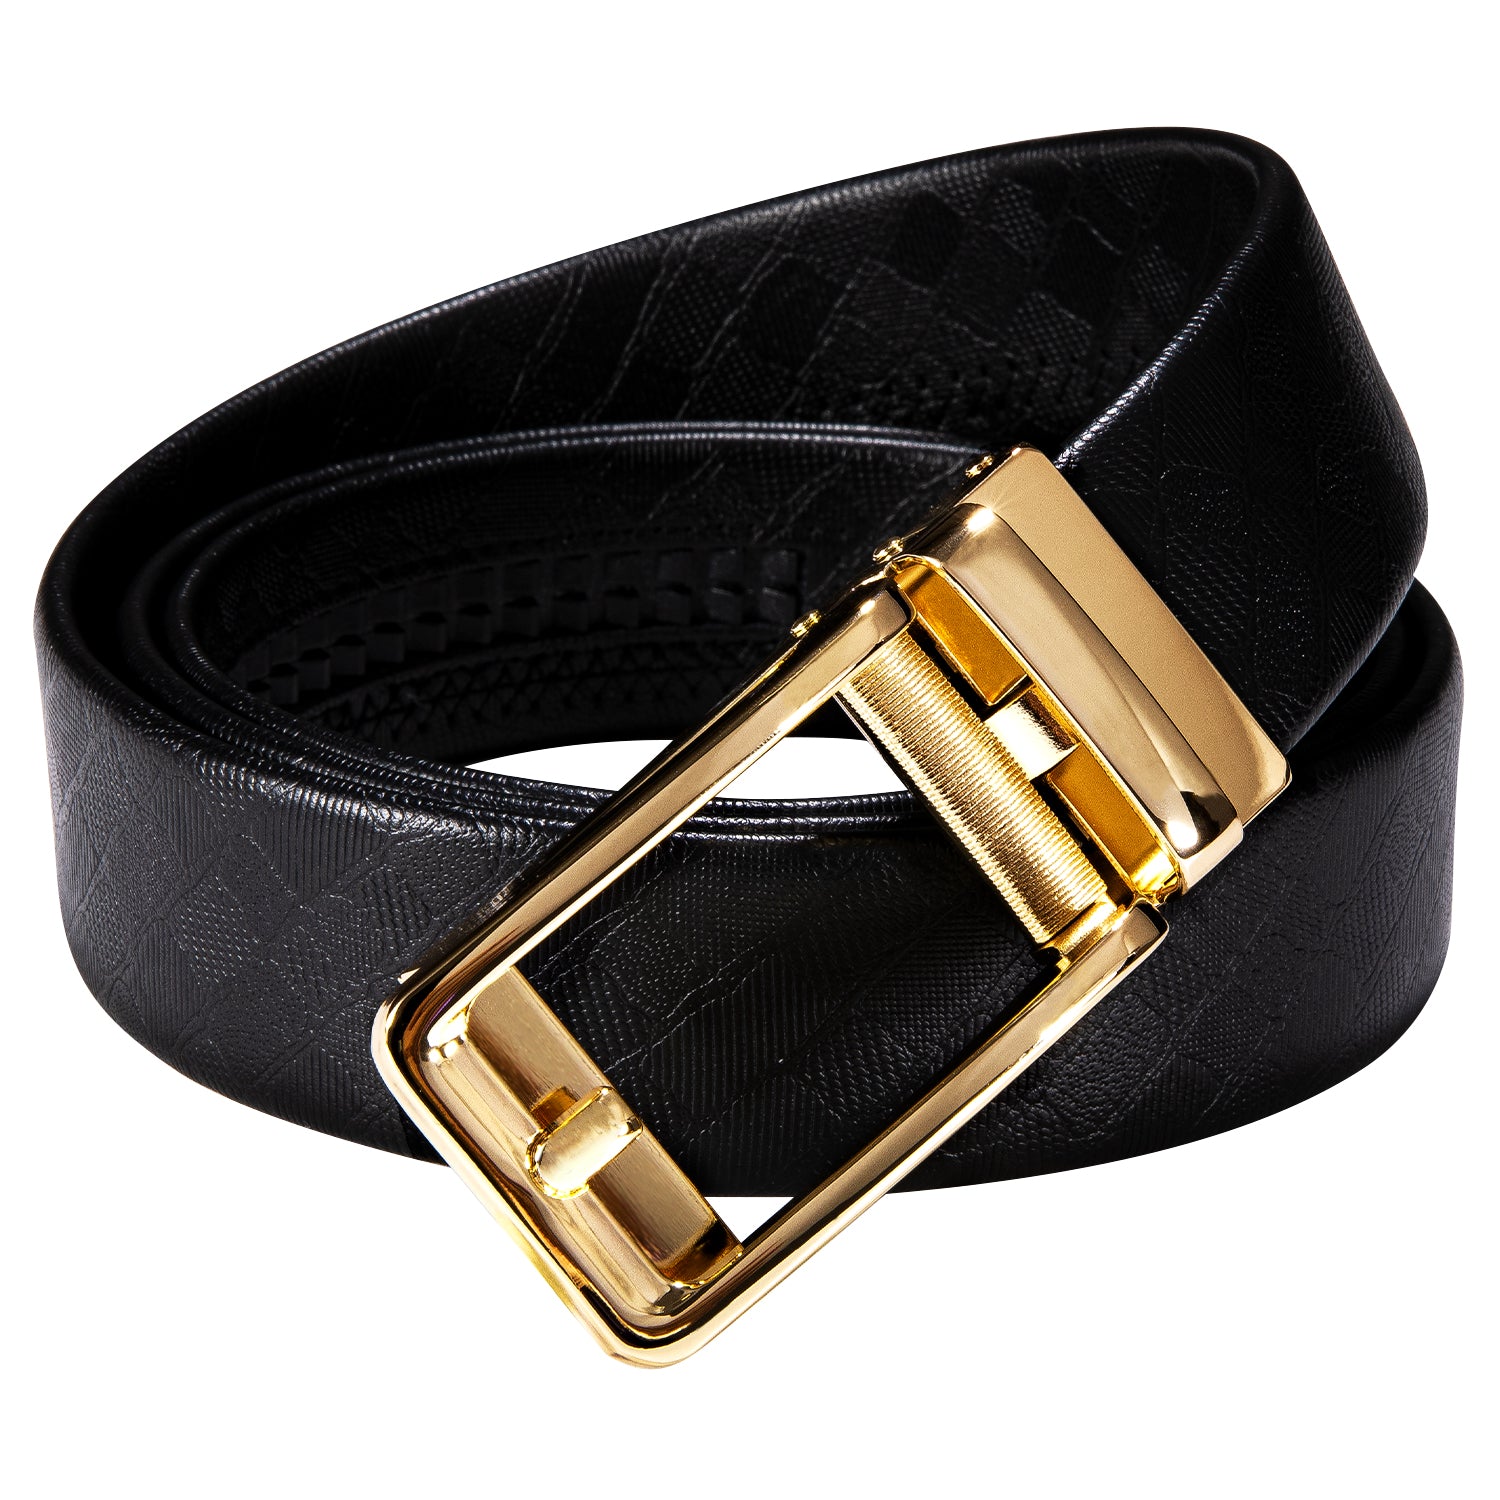 Barry.wang Men's Belt Golden Square Metal Buckle Genuine Leather Belt 43 inch to 63 inch